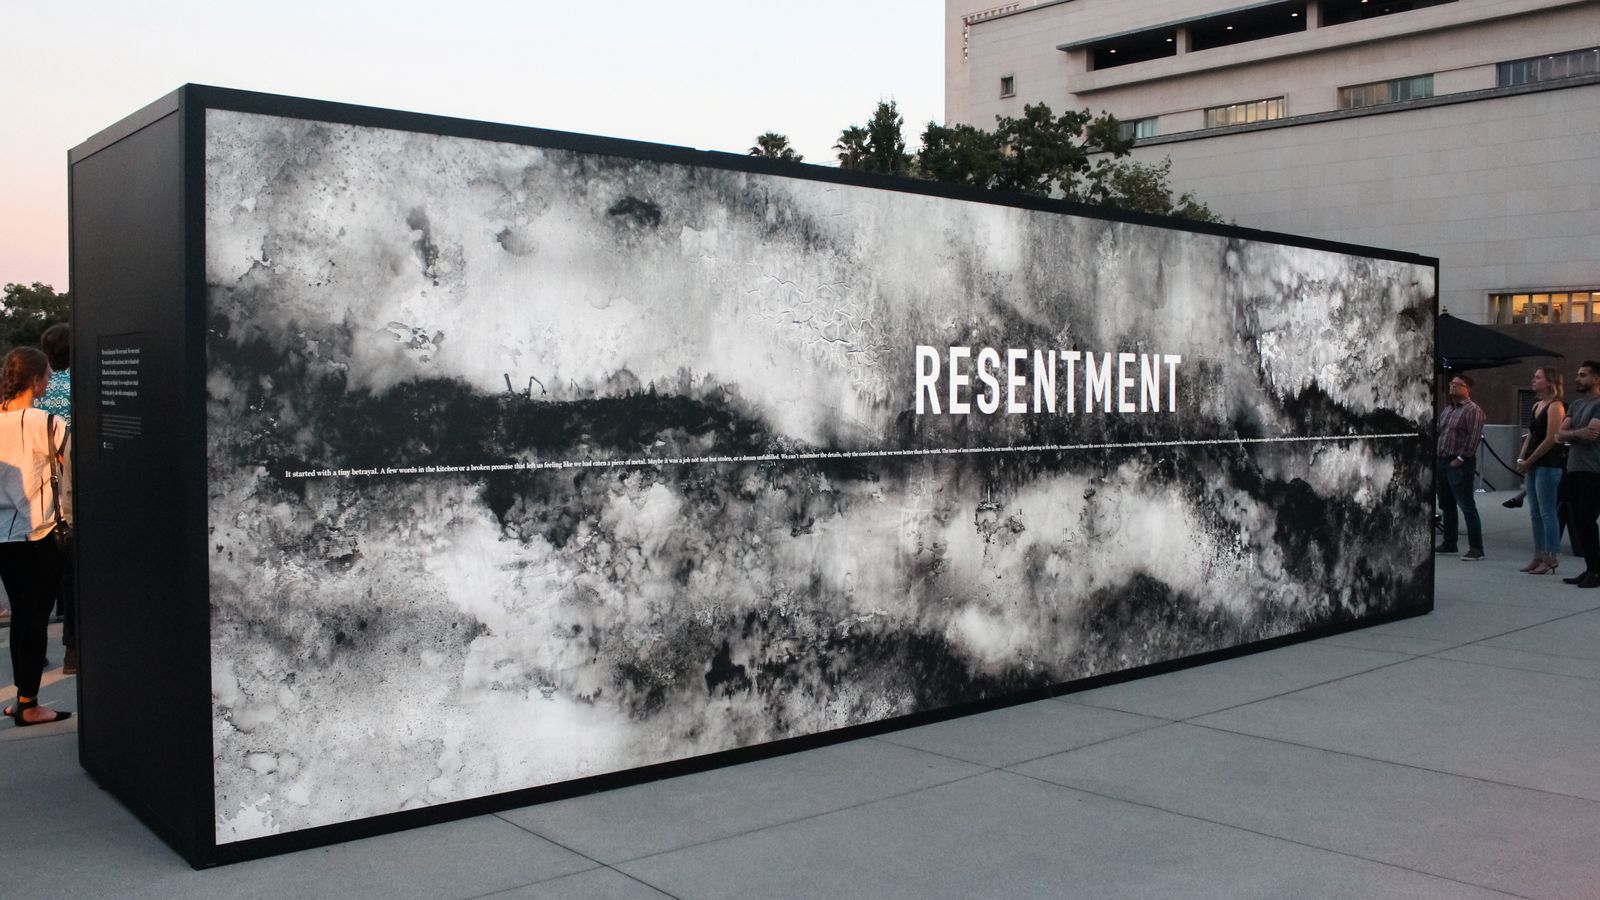 Lightbox sign with the word Resentment displayed on it